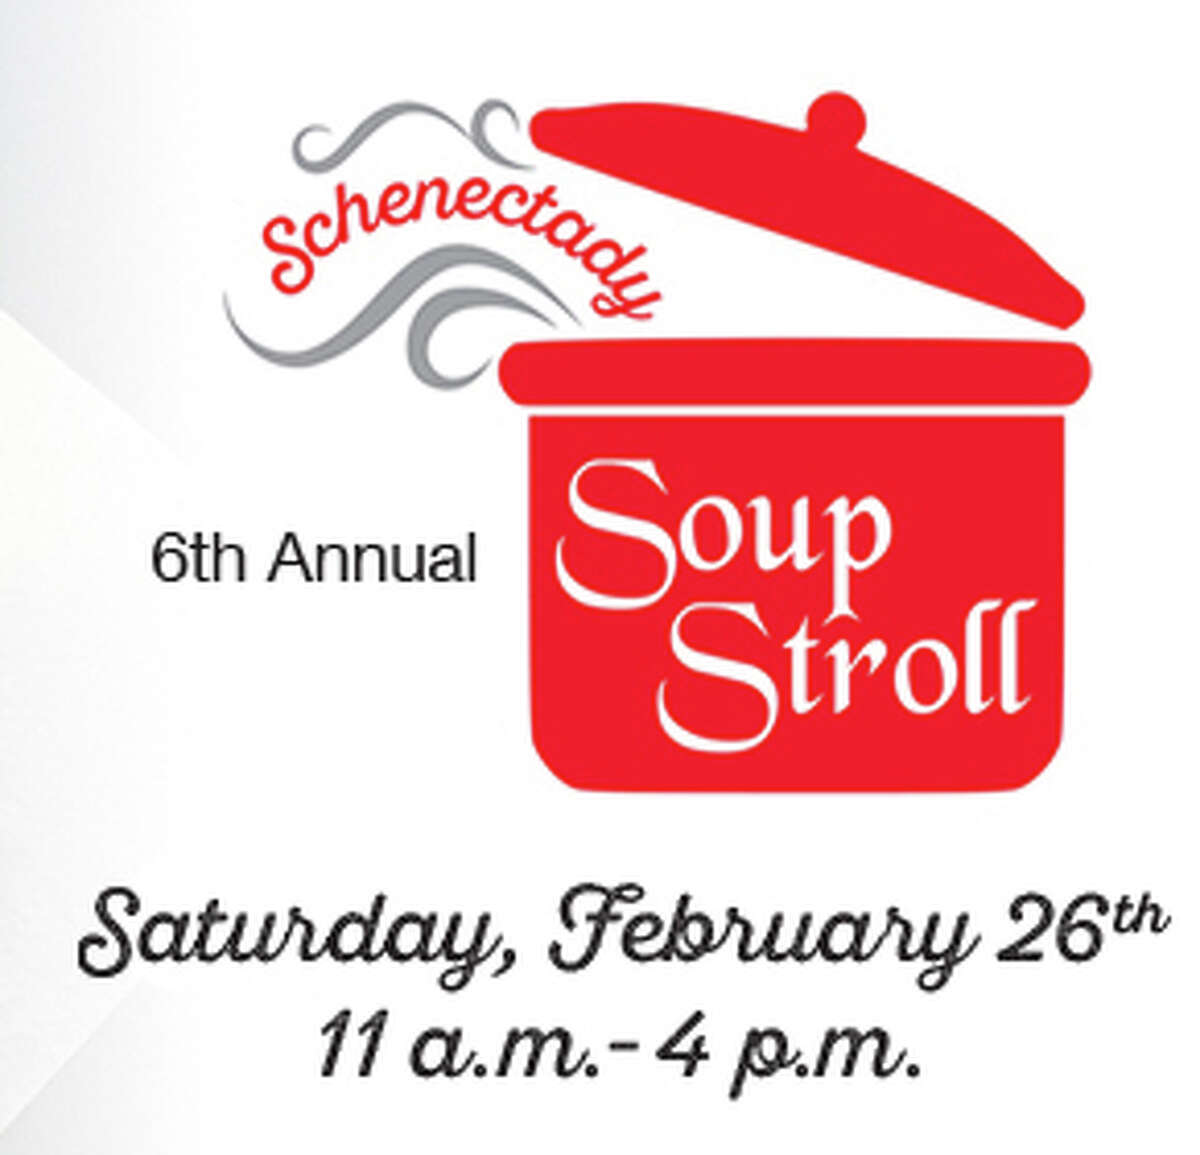 Schenectady Soup Stroll set for Feb. 26